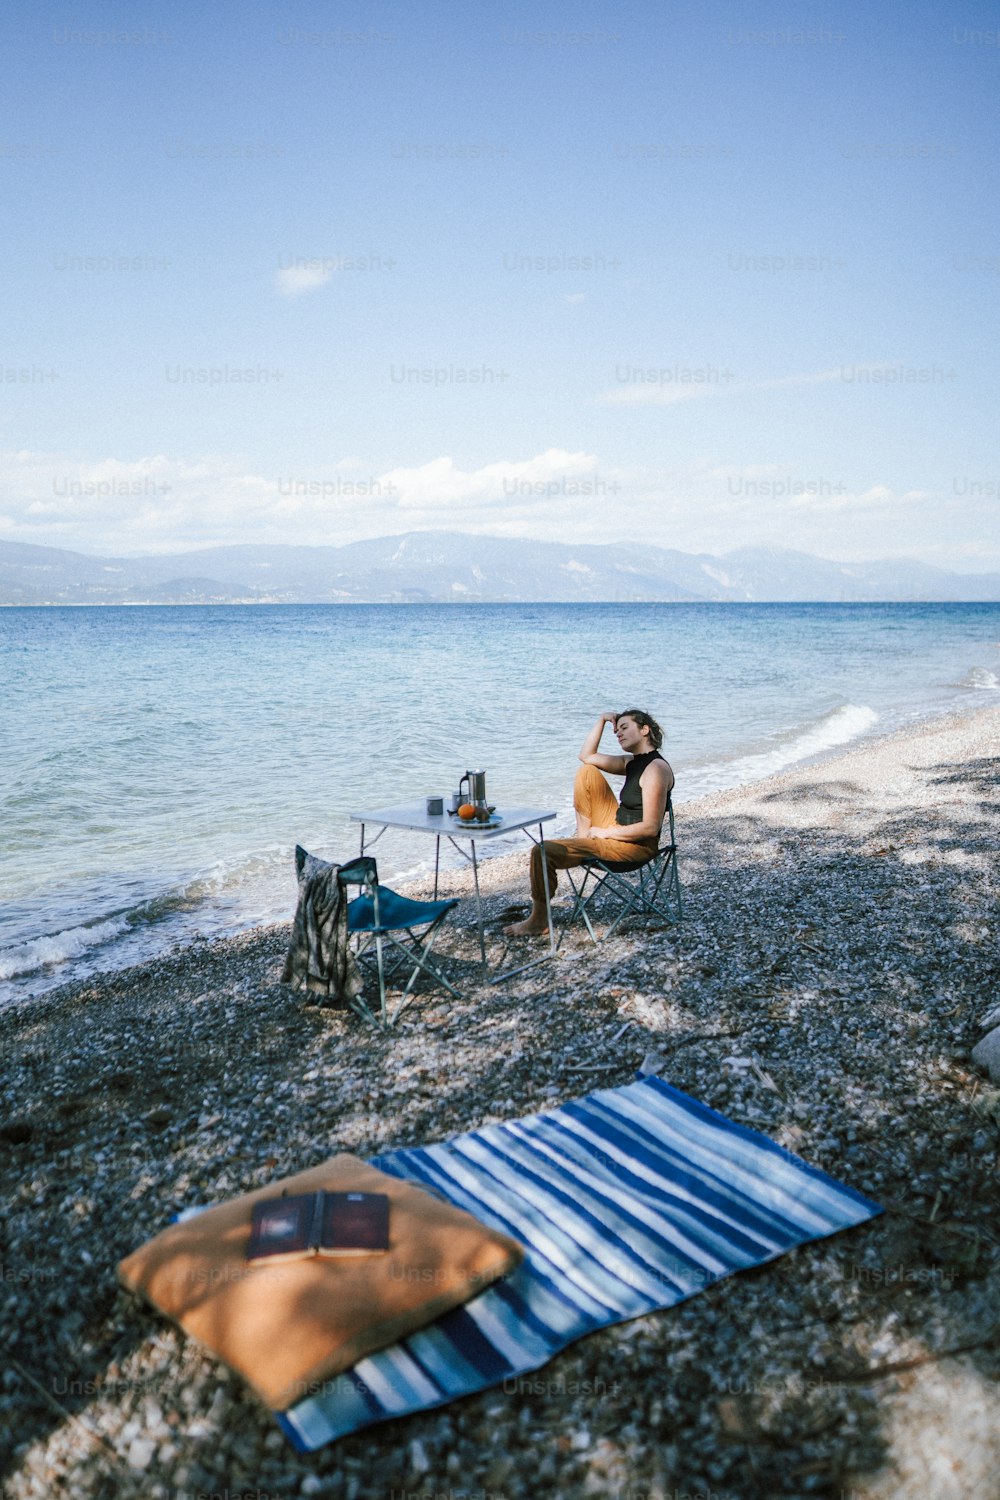 a man sitting in a chair on the beach